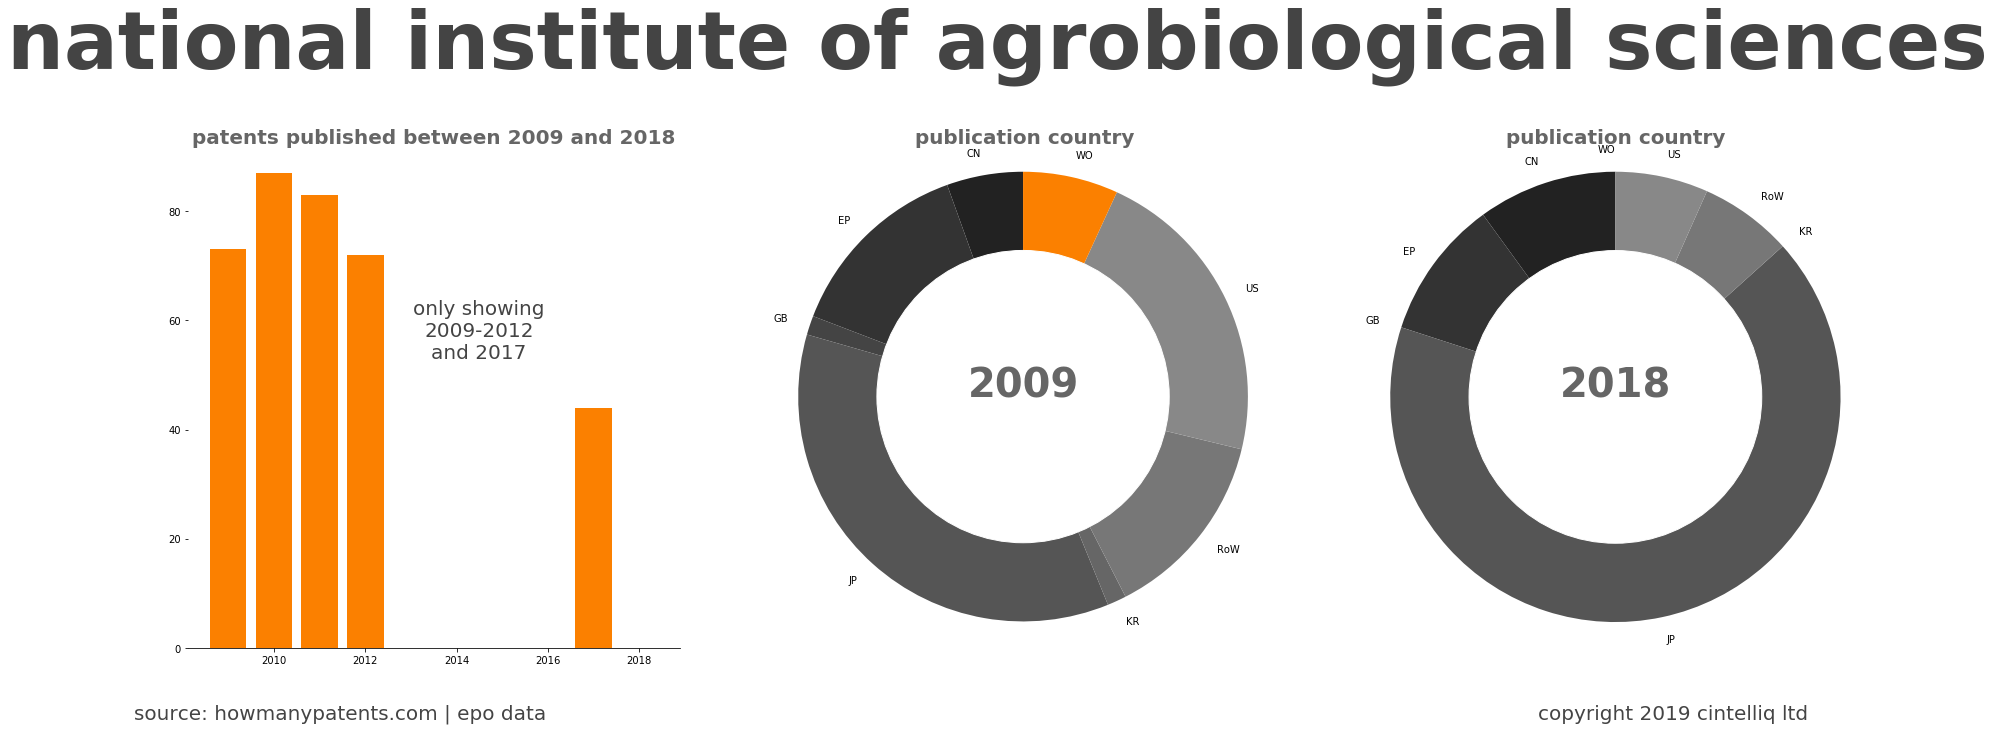 summary of patents for National Institute Of Agrobiological Sciences